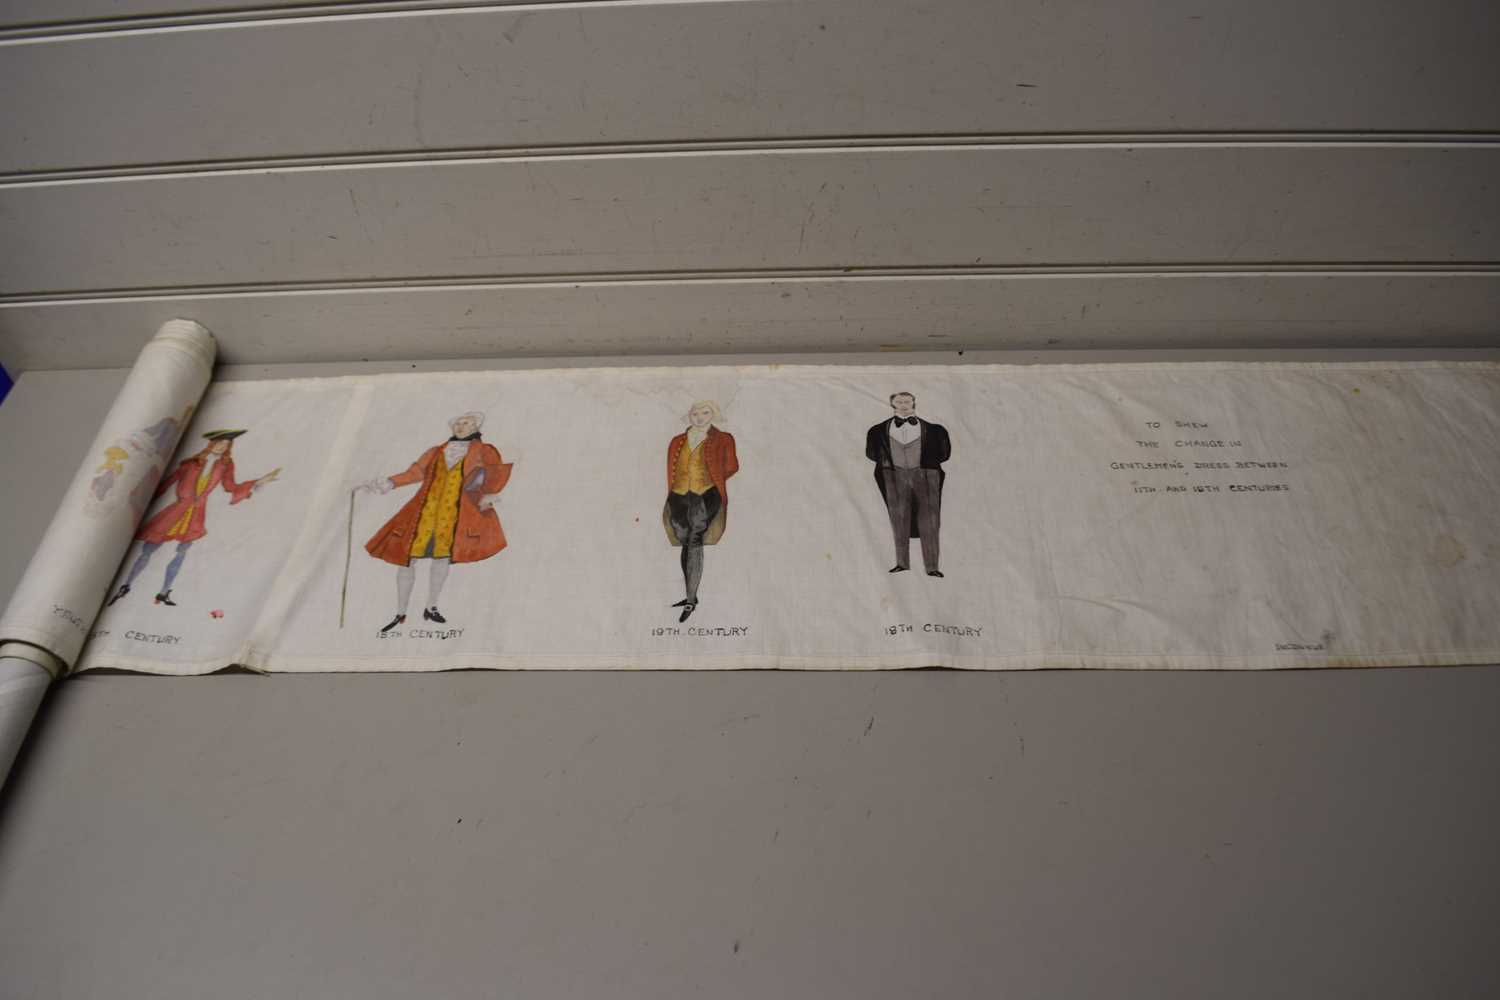 COTTON FLAG SHOWING THE CHANGE IN GENTLEMANS DRESS BETWEEN THE 11TH AND 19TH CENTURIES